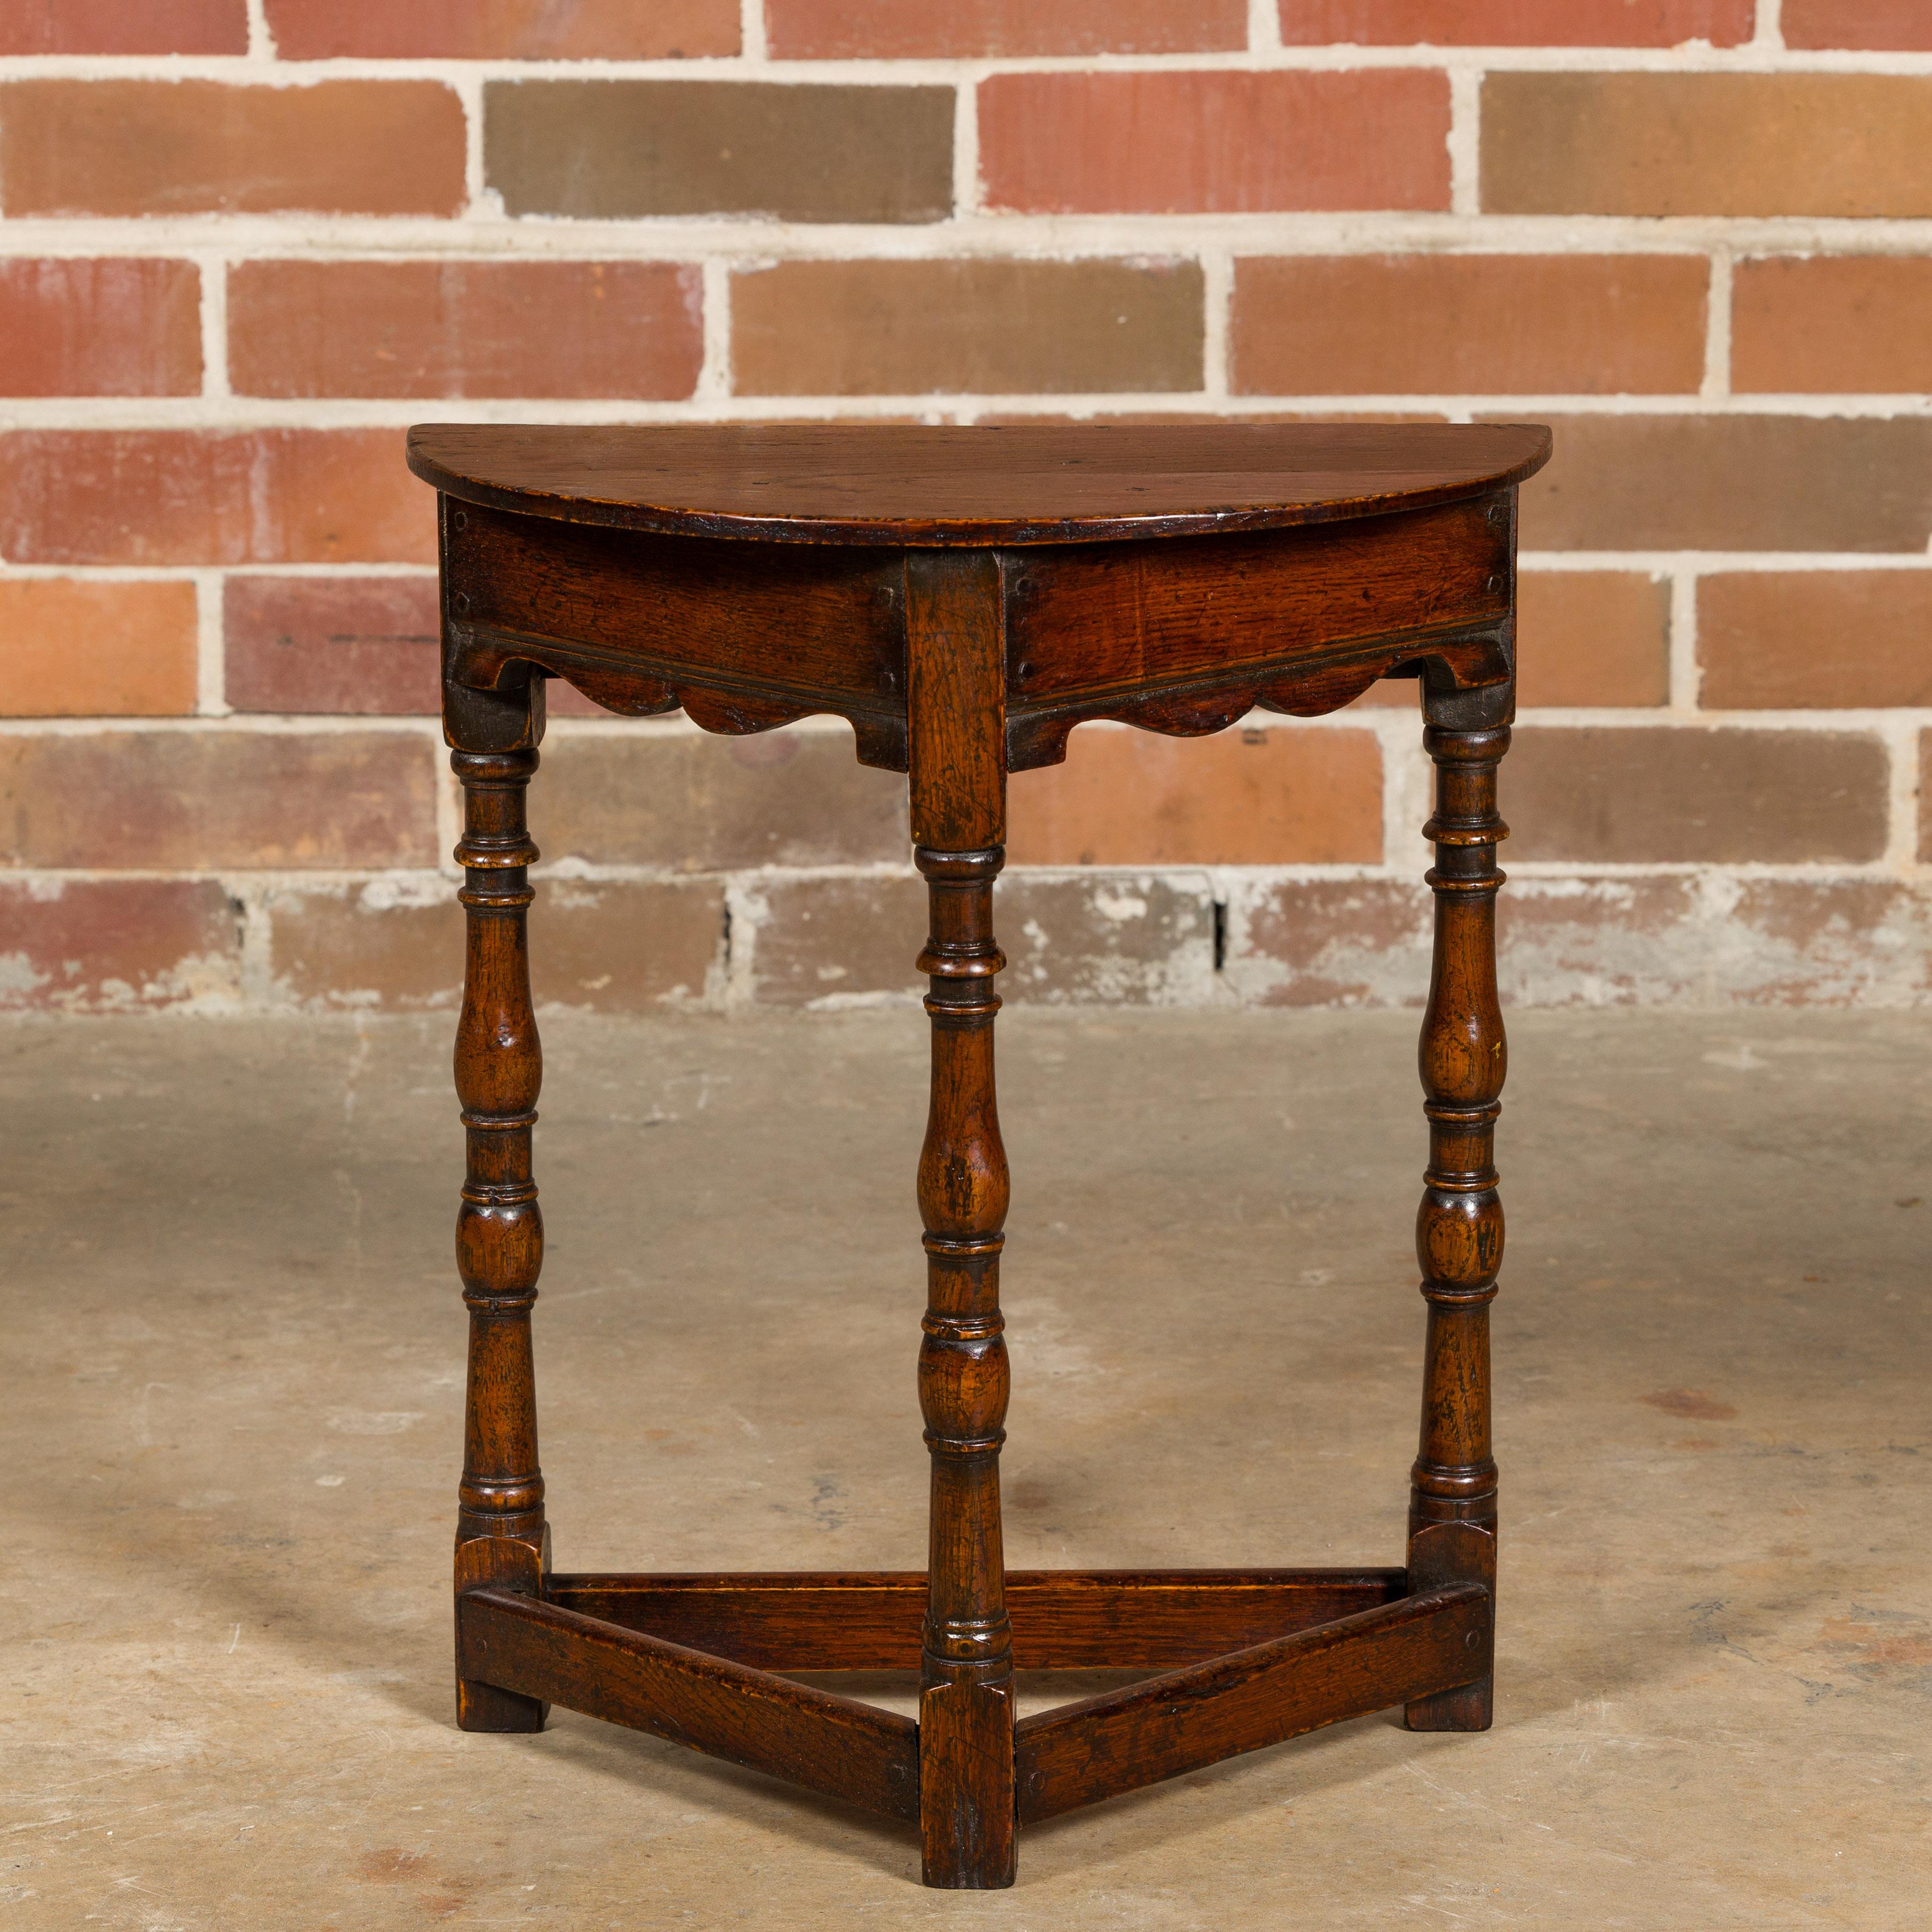 This charming English oak demi-lune side table from the 19th century is a beautiful blend of classical design and rustic appeal. Its small, half-moon shape makes it a versatile piece, perfect for adding a touch of antique elegance to a variety of